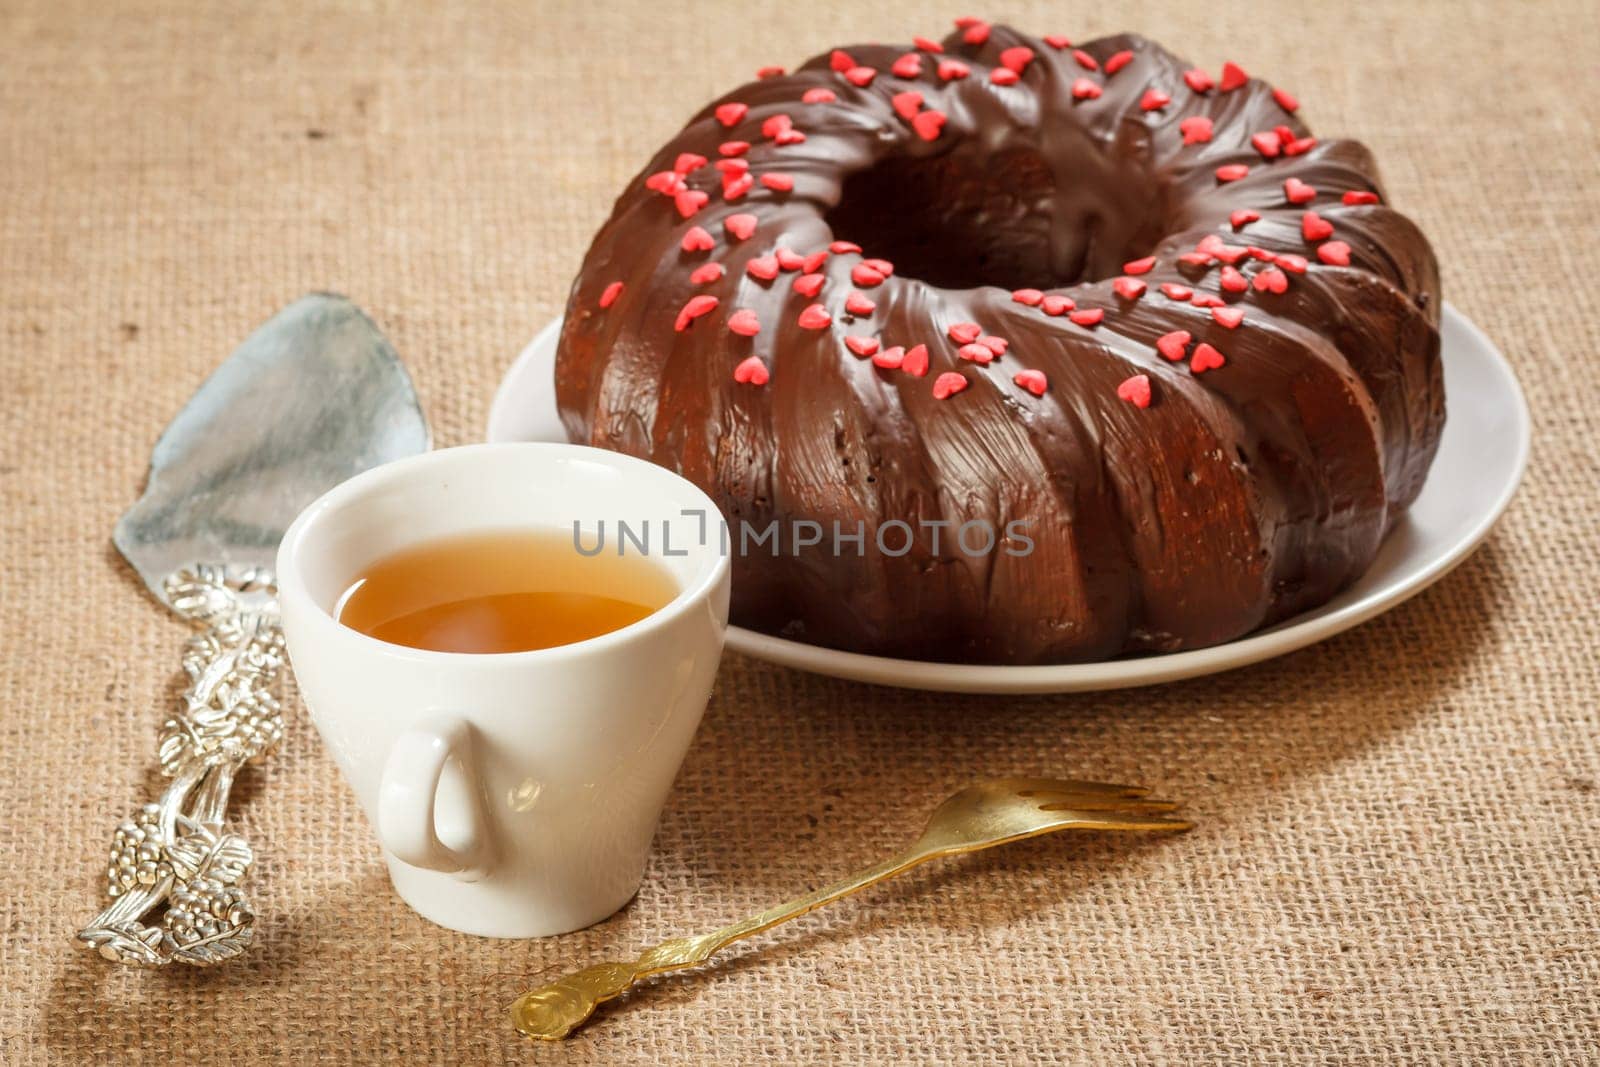 Cup of tea, homemade chocolate cake decorated with small hearts made of caramel on plate, silver cake lifter beside it and fork on table with sackcloth.